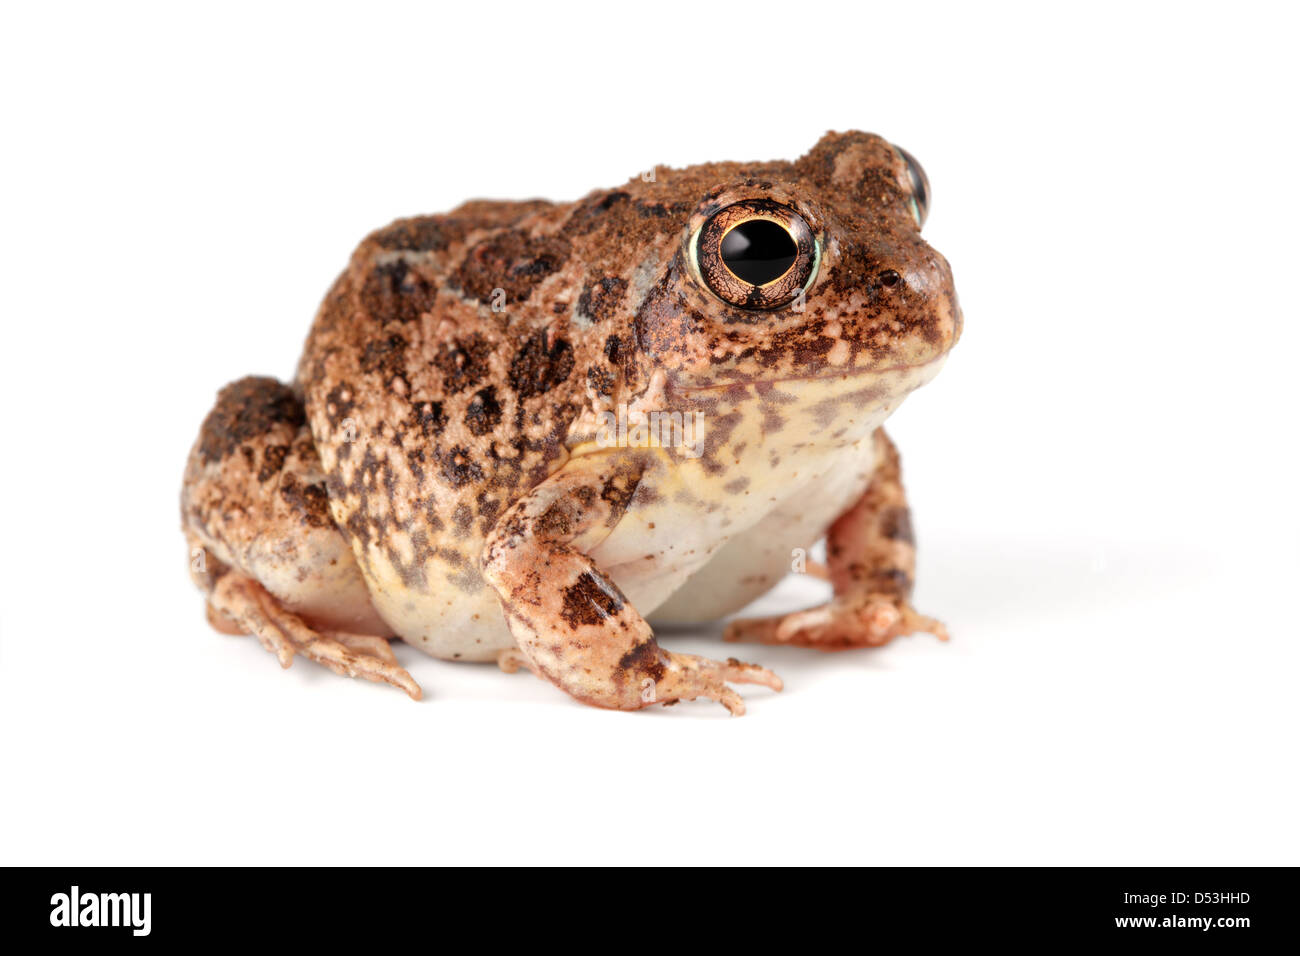 A southern African sand frog (Tomopterna cryptotis) on white Stock Photo